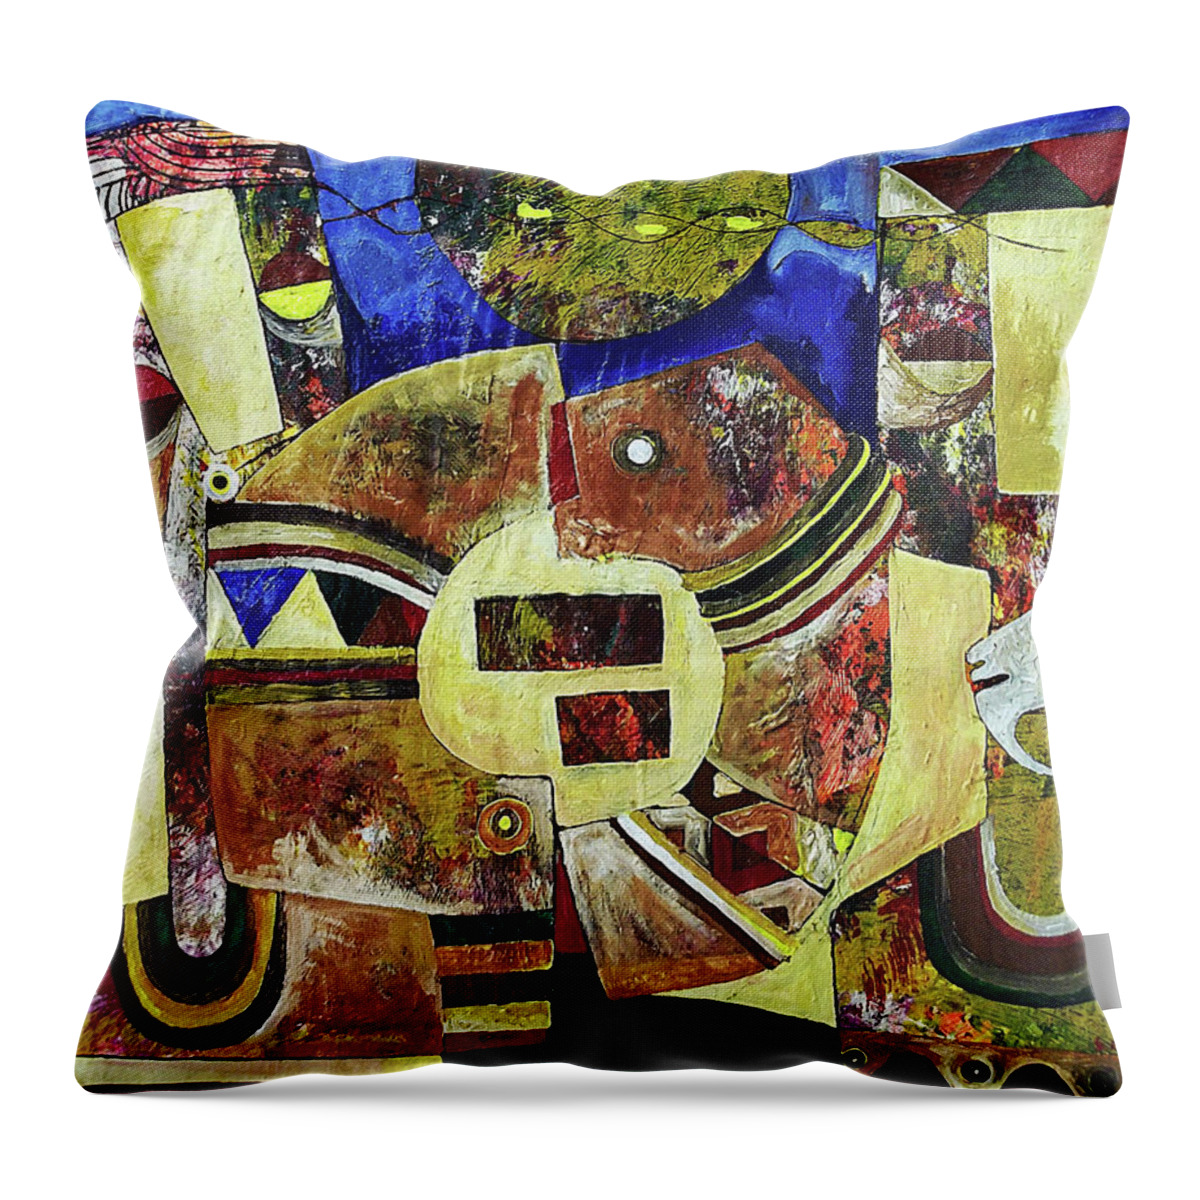 African Throw Pillow featuring the painting The Guilty Are Afraid by Speelman Mahlangu 1958-2004